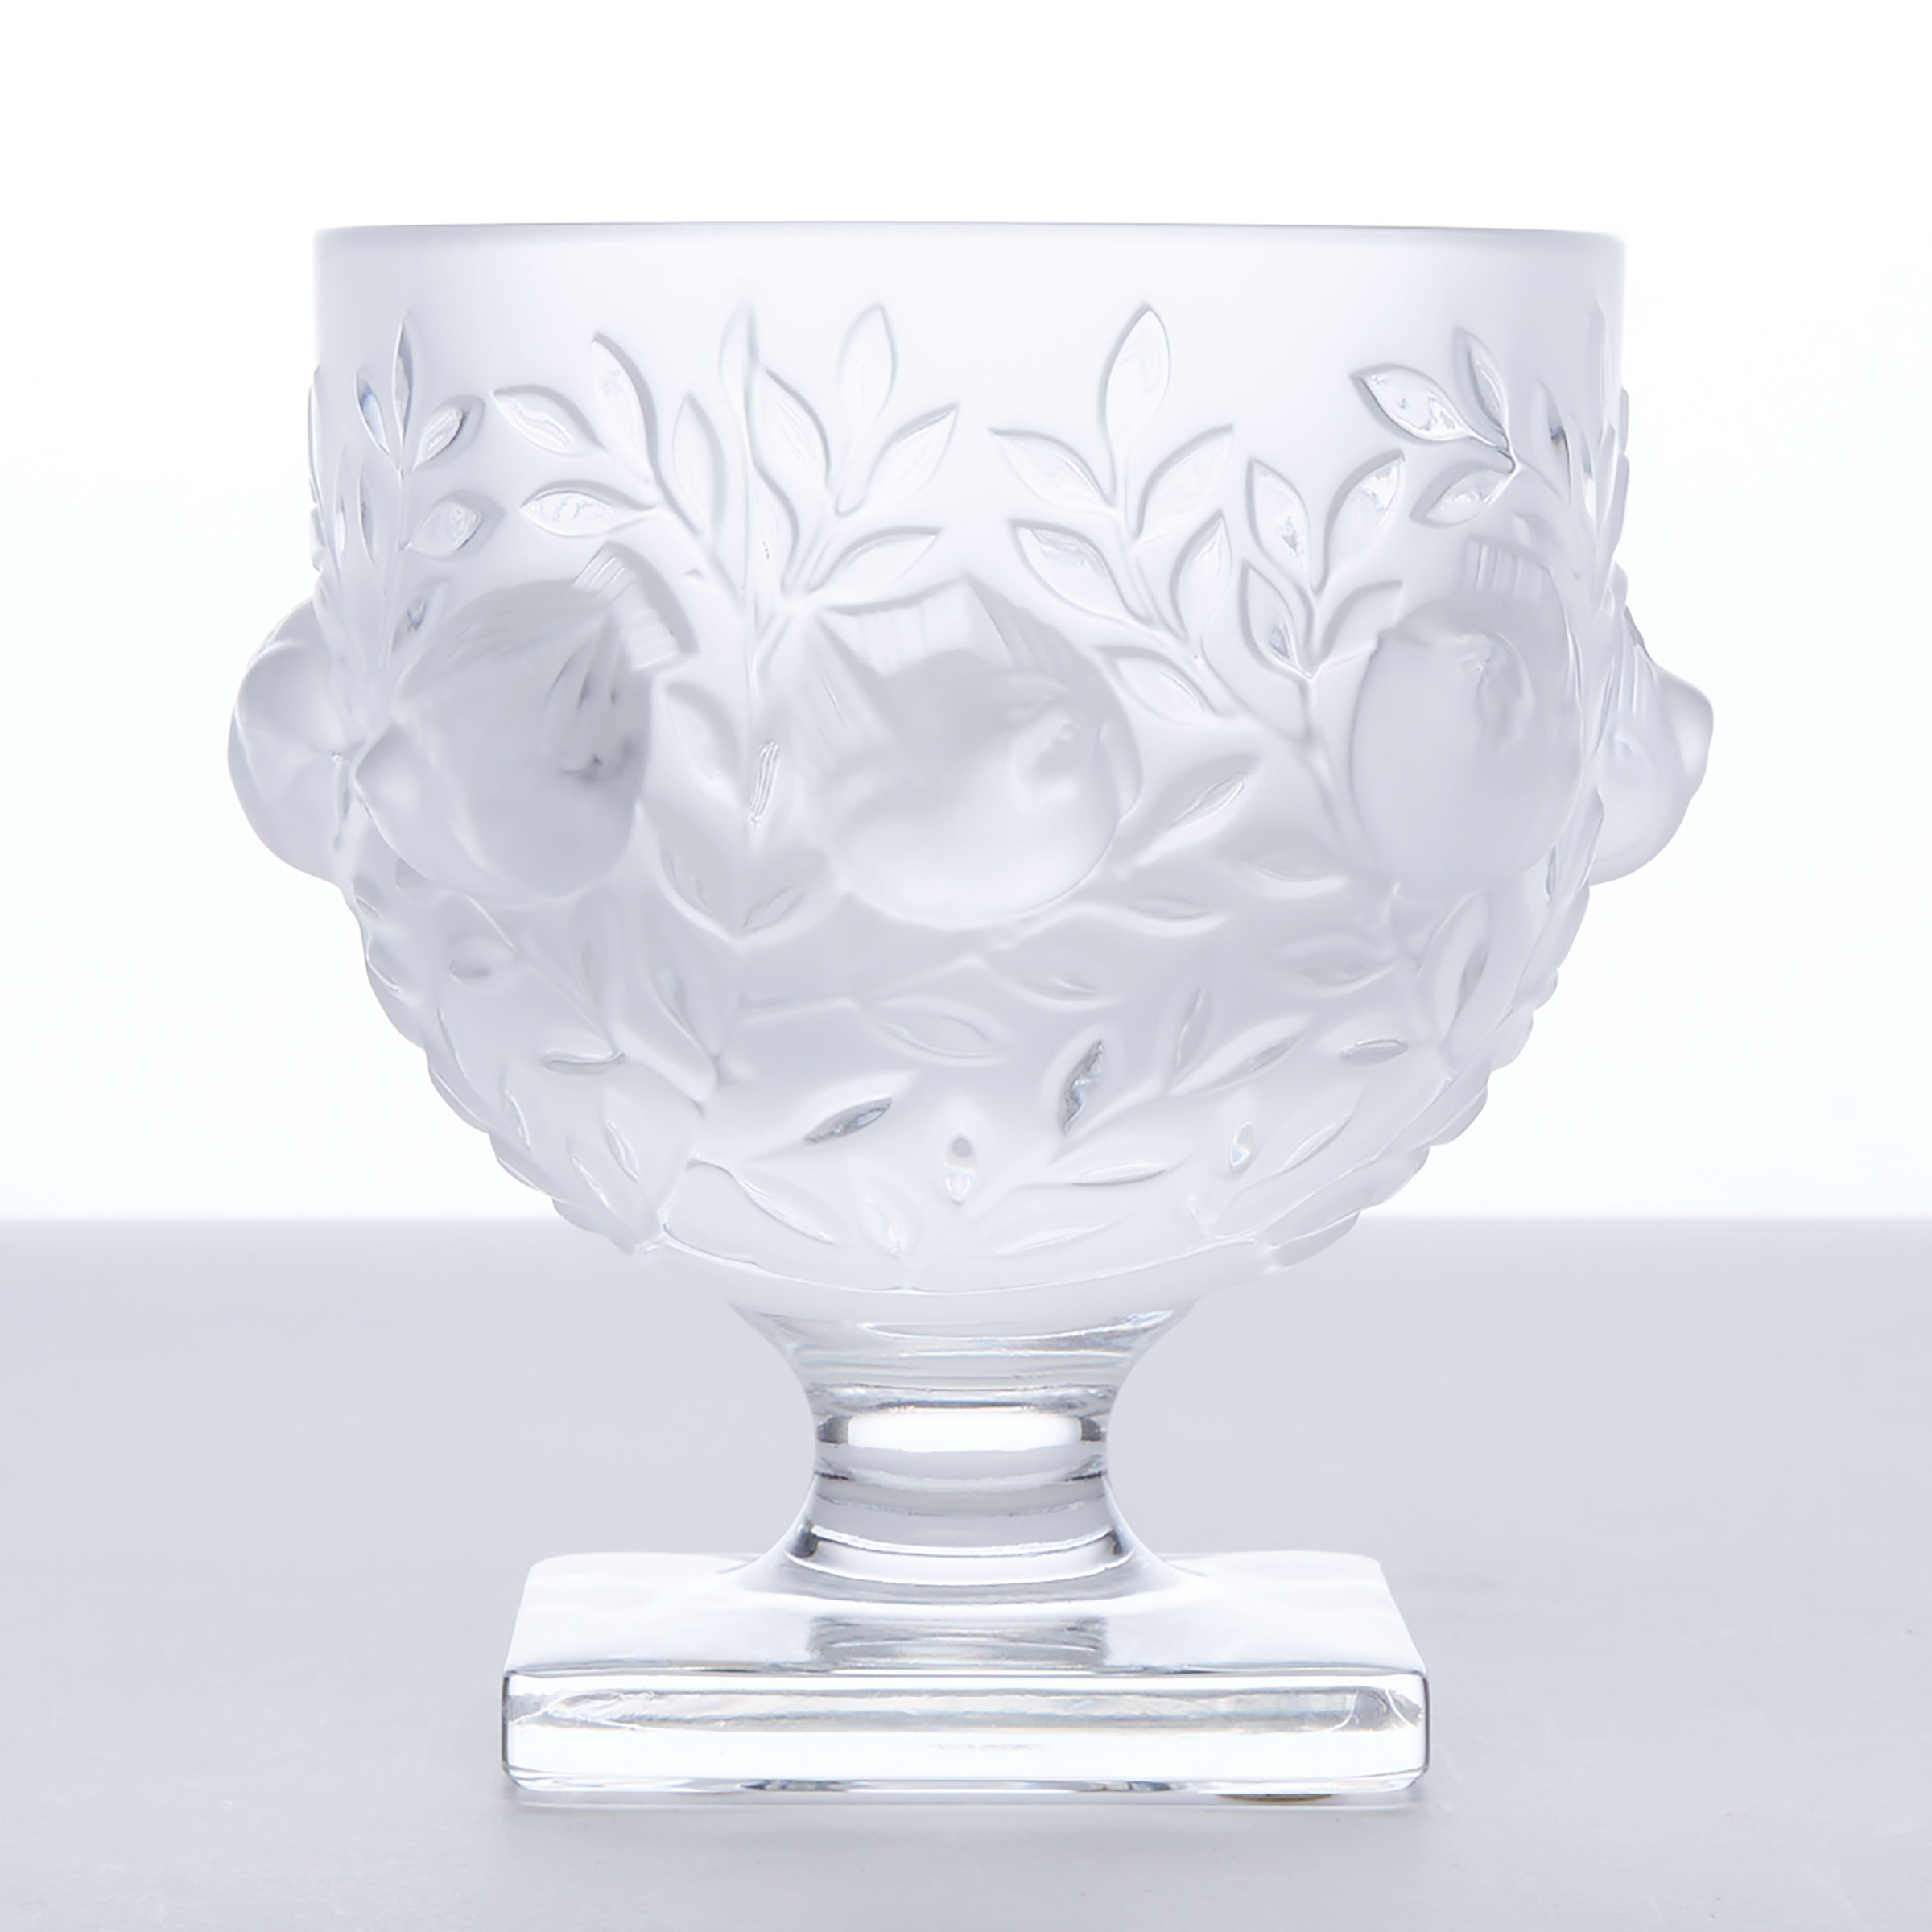 ‘Elisabeth’, Lalique Moulded and Partly Frosted Pedestal-Footed Vase, 20th century